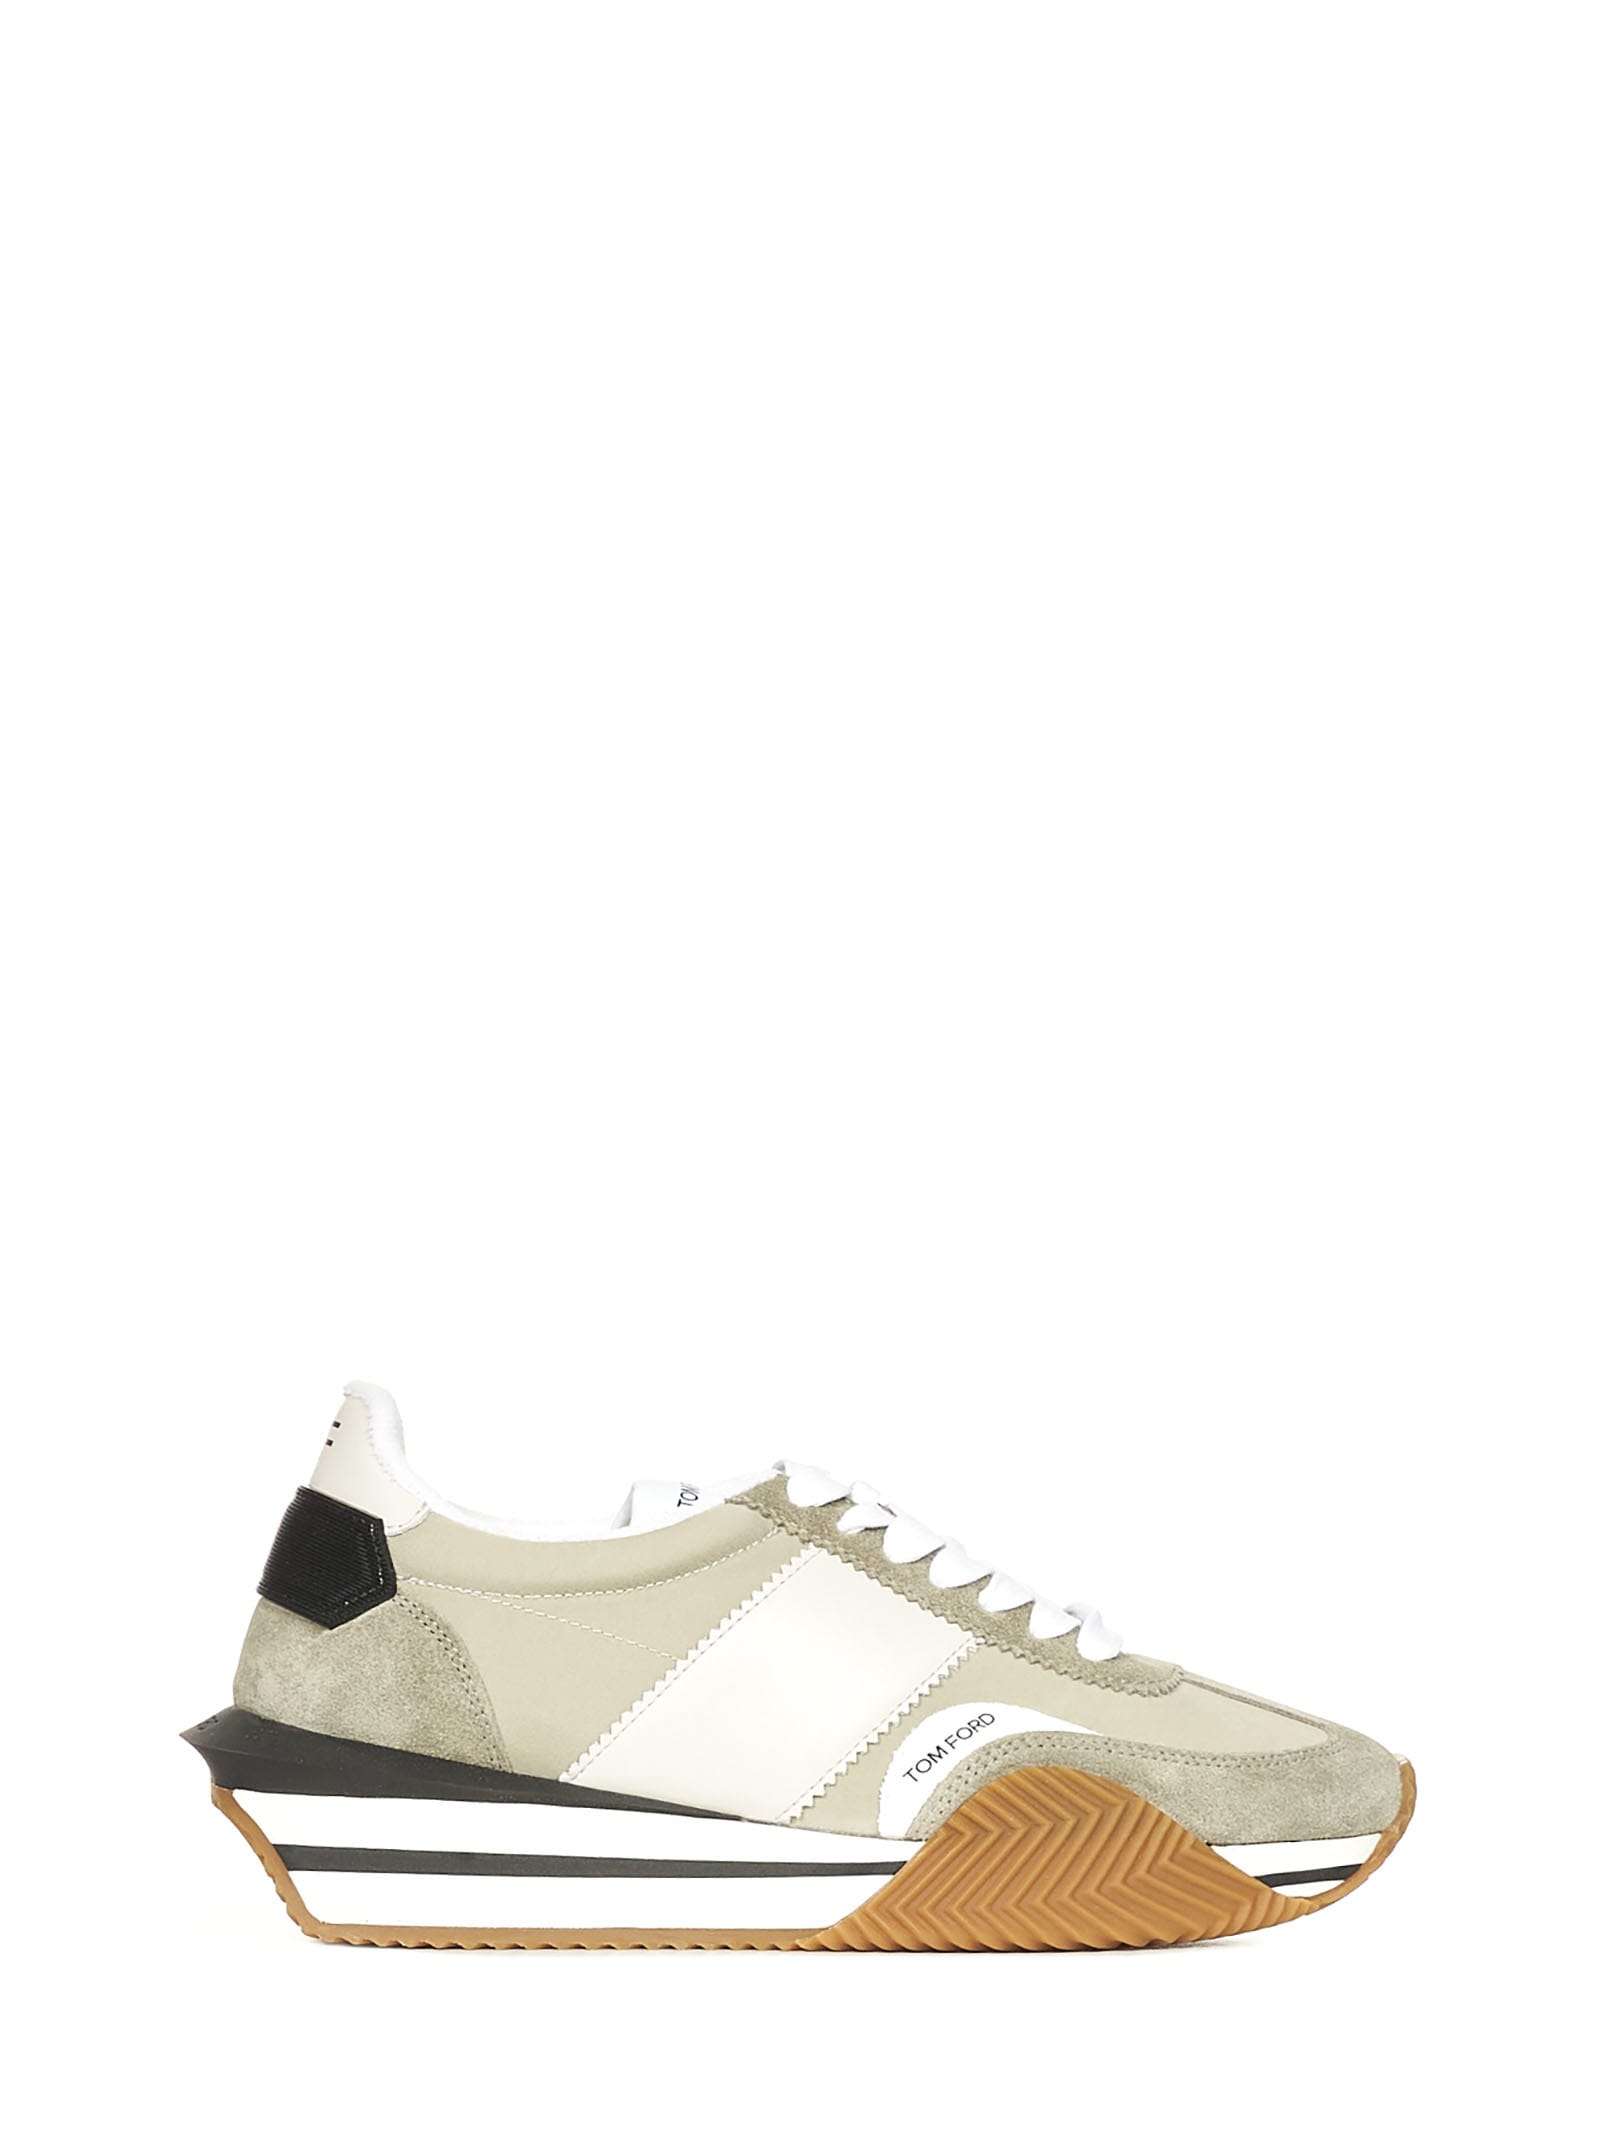 TOM FORD JAMES SNEAKERS